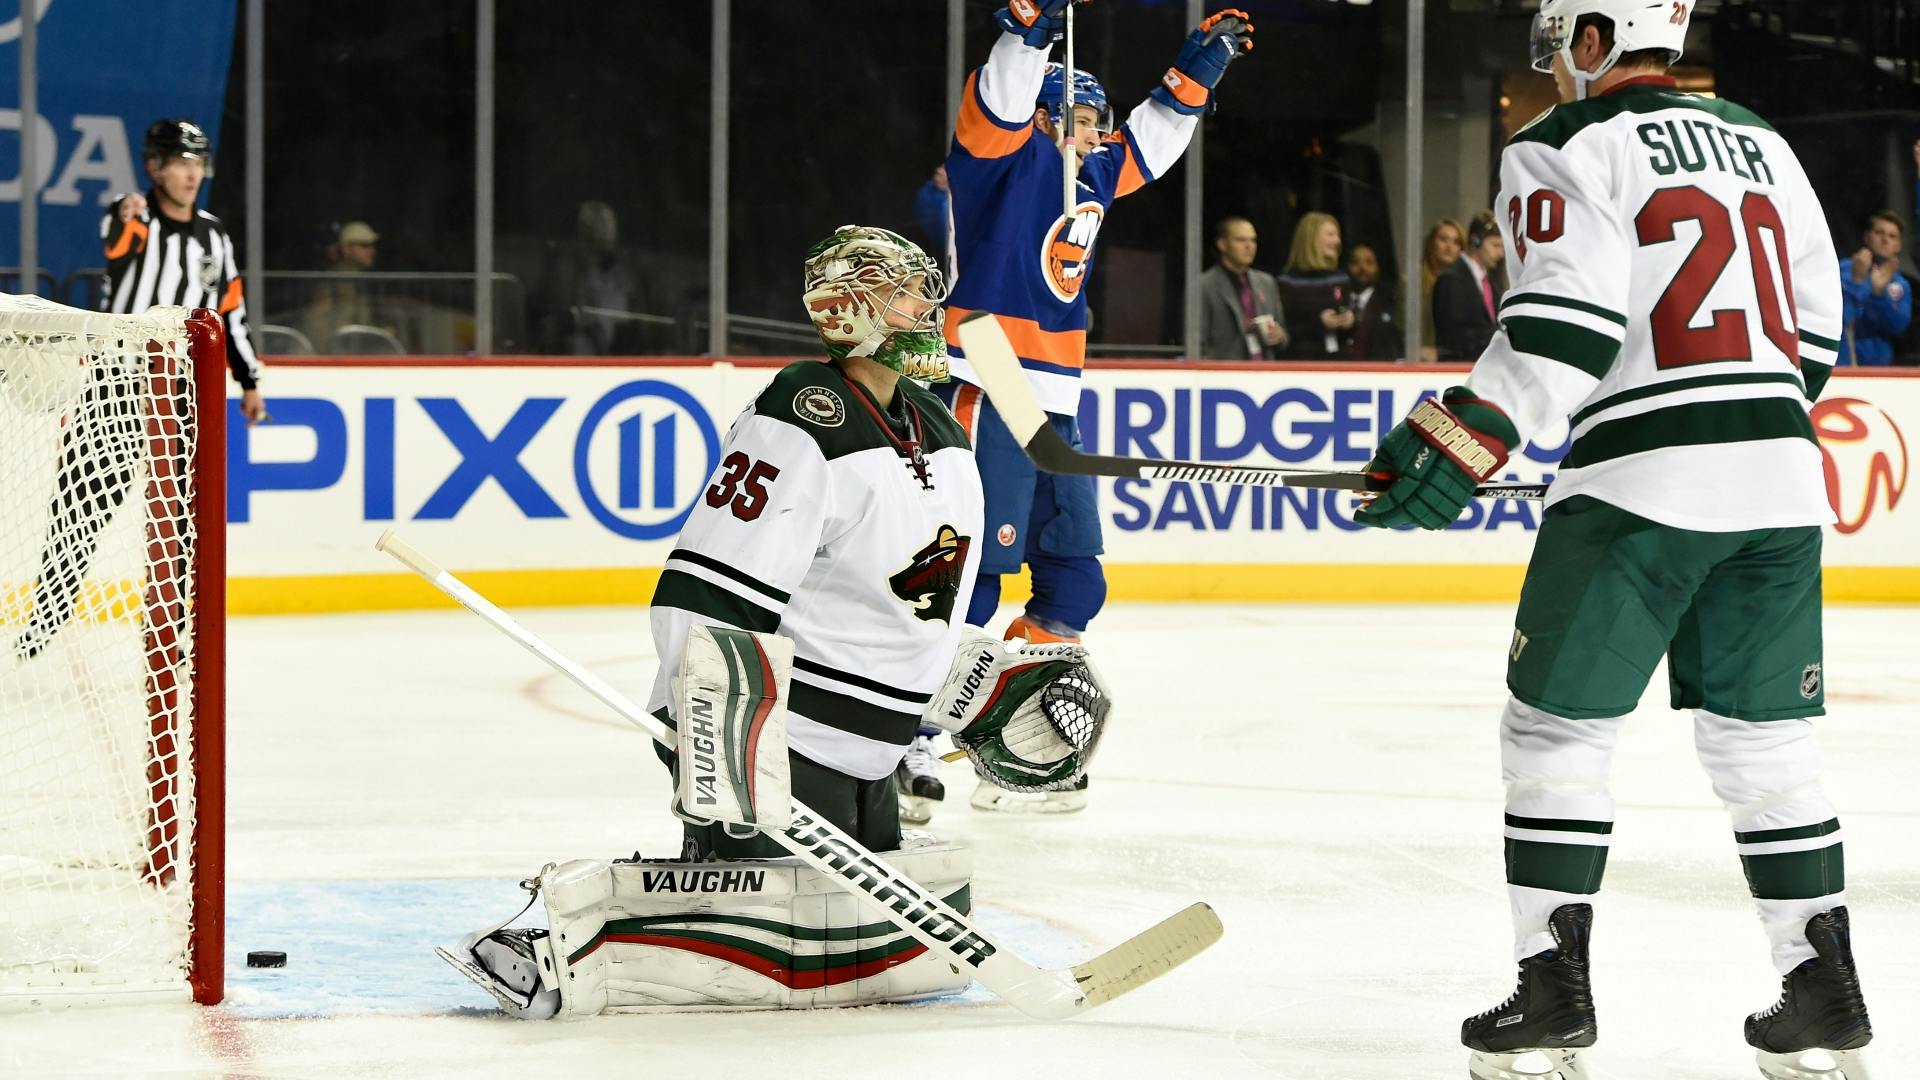 Zach Parise scored twice to reach the 300-goal mark, but it wasn't enough to overcome Darcy Kuemper's poor goaltending performance against the Islanders.